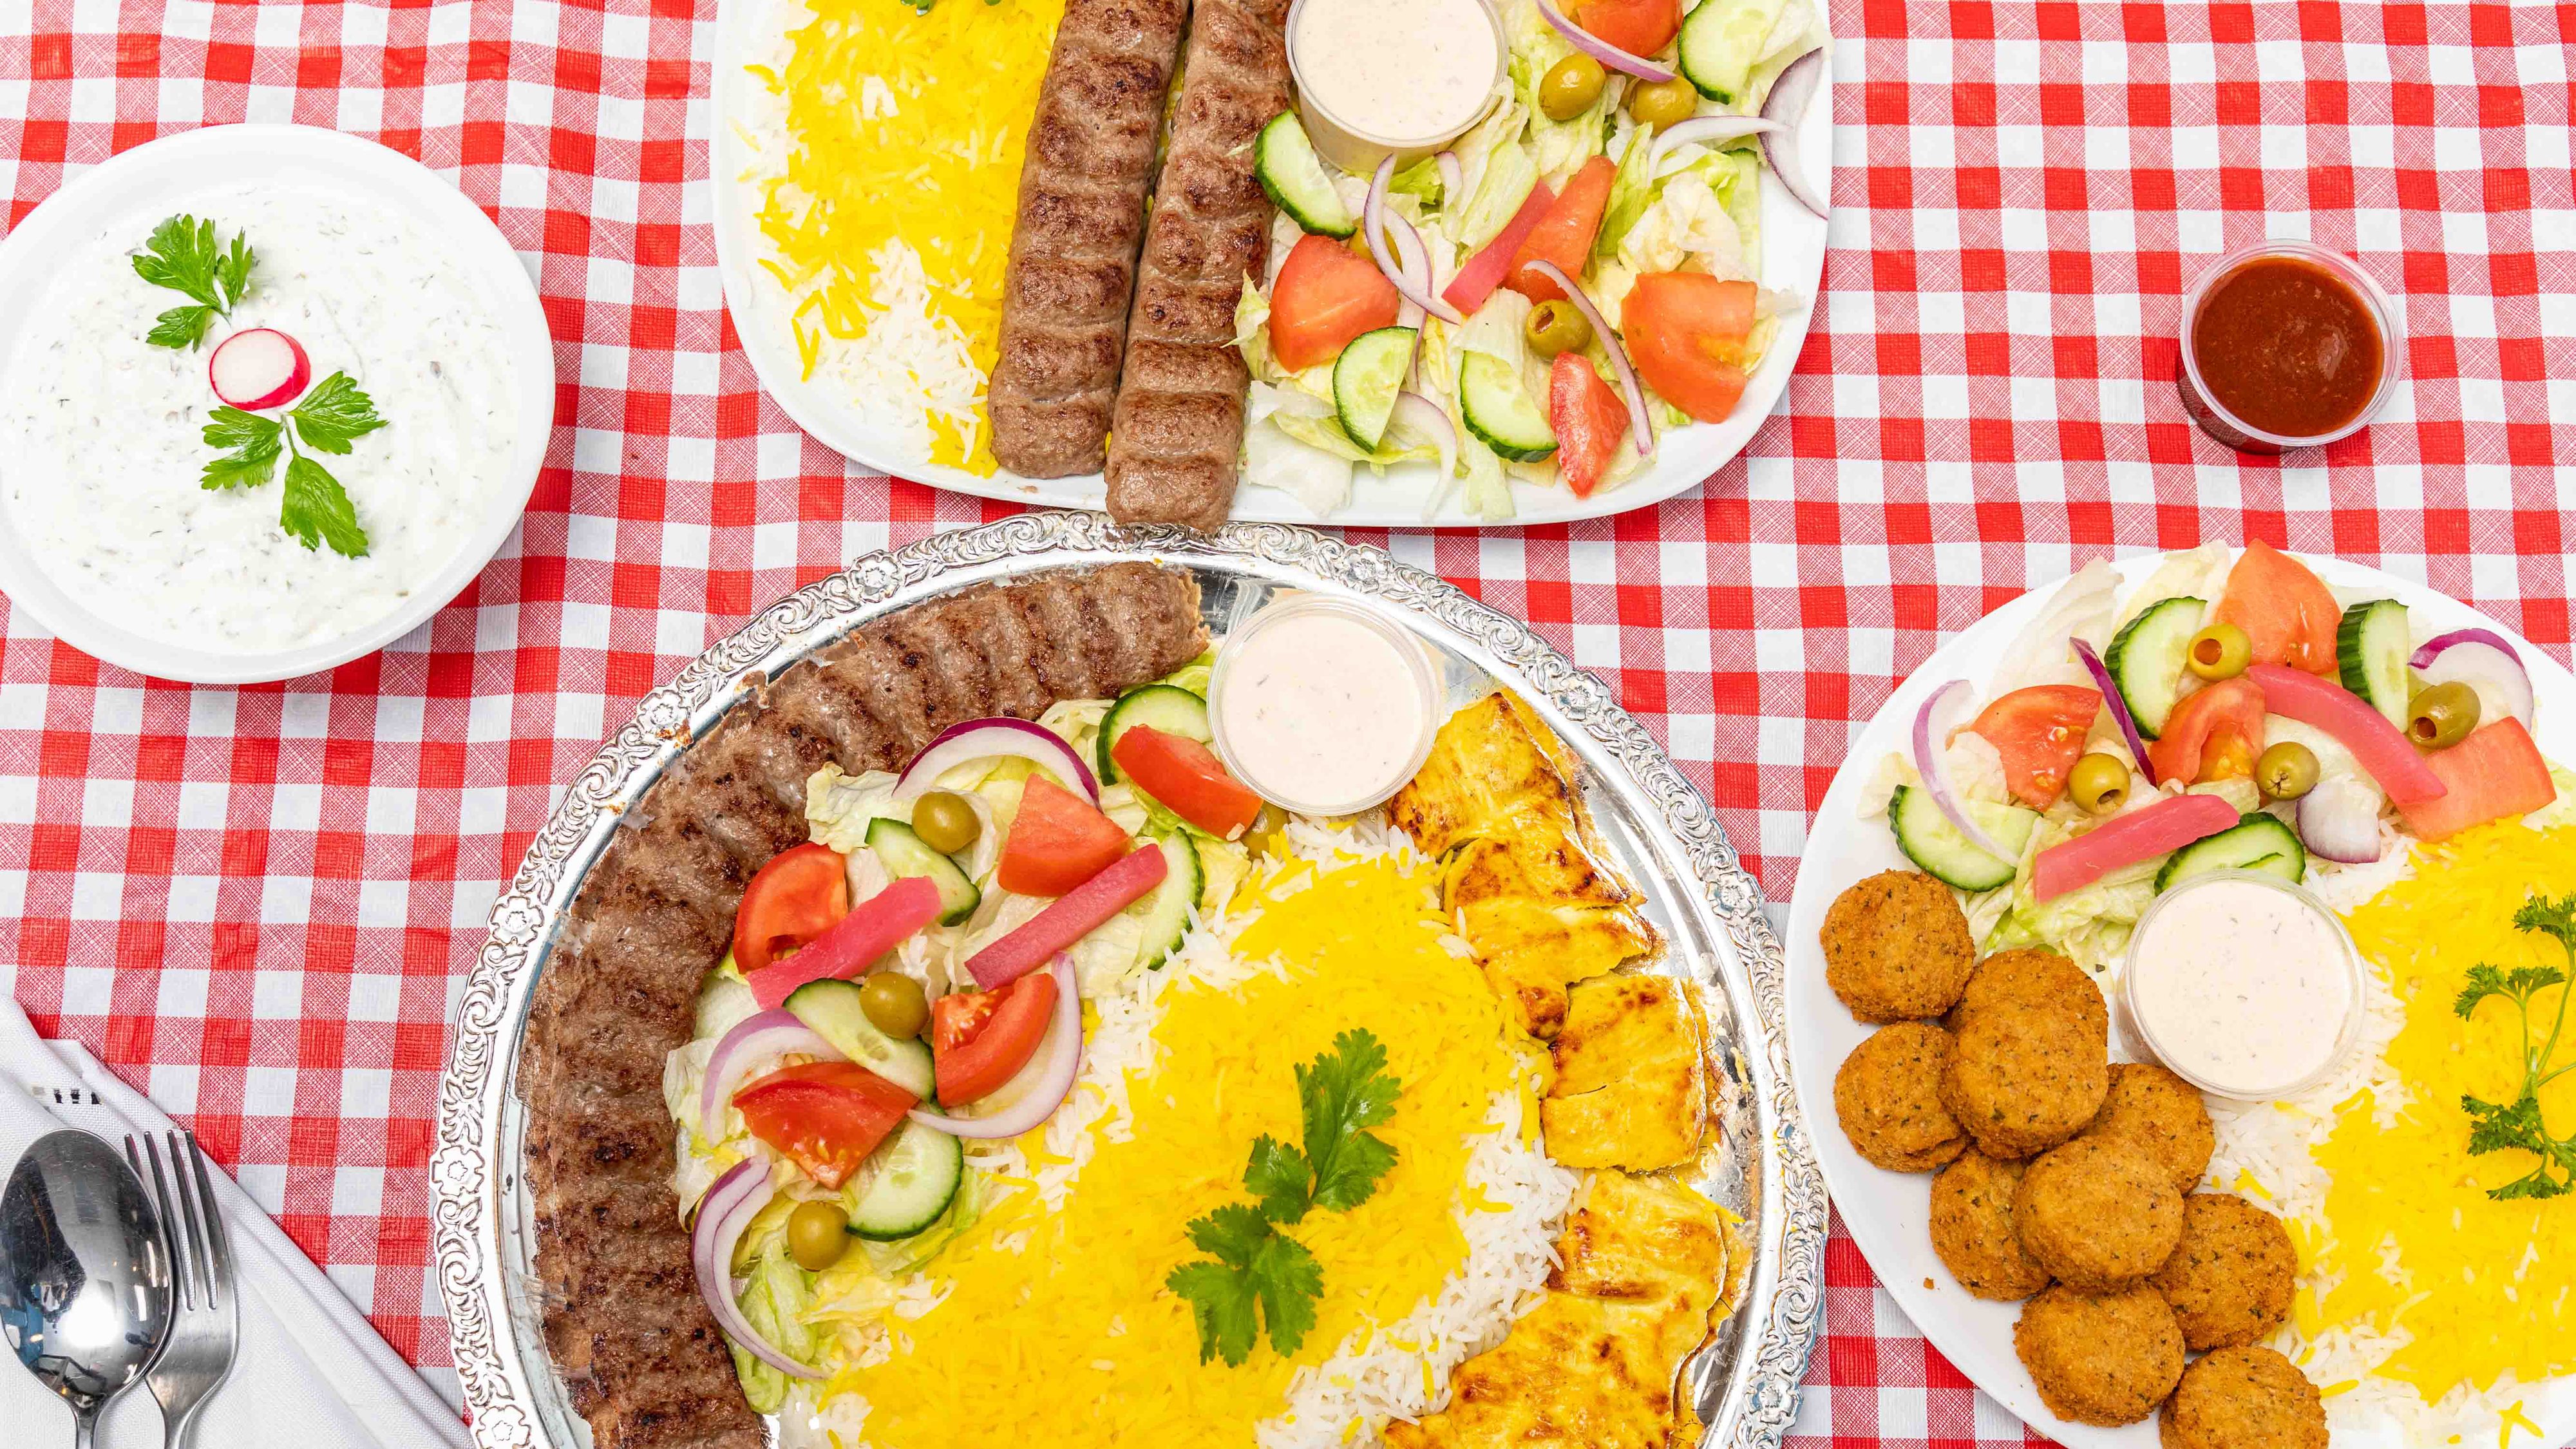 many different Persian dishes